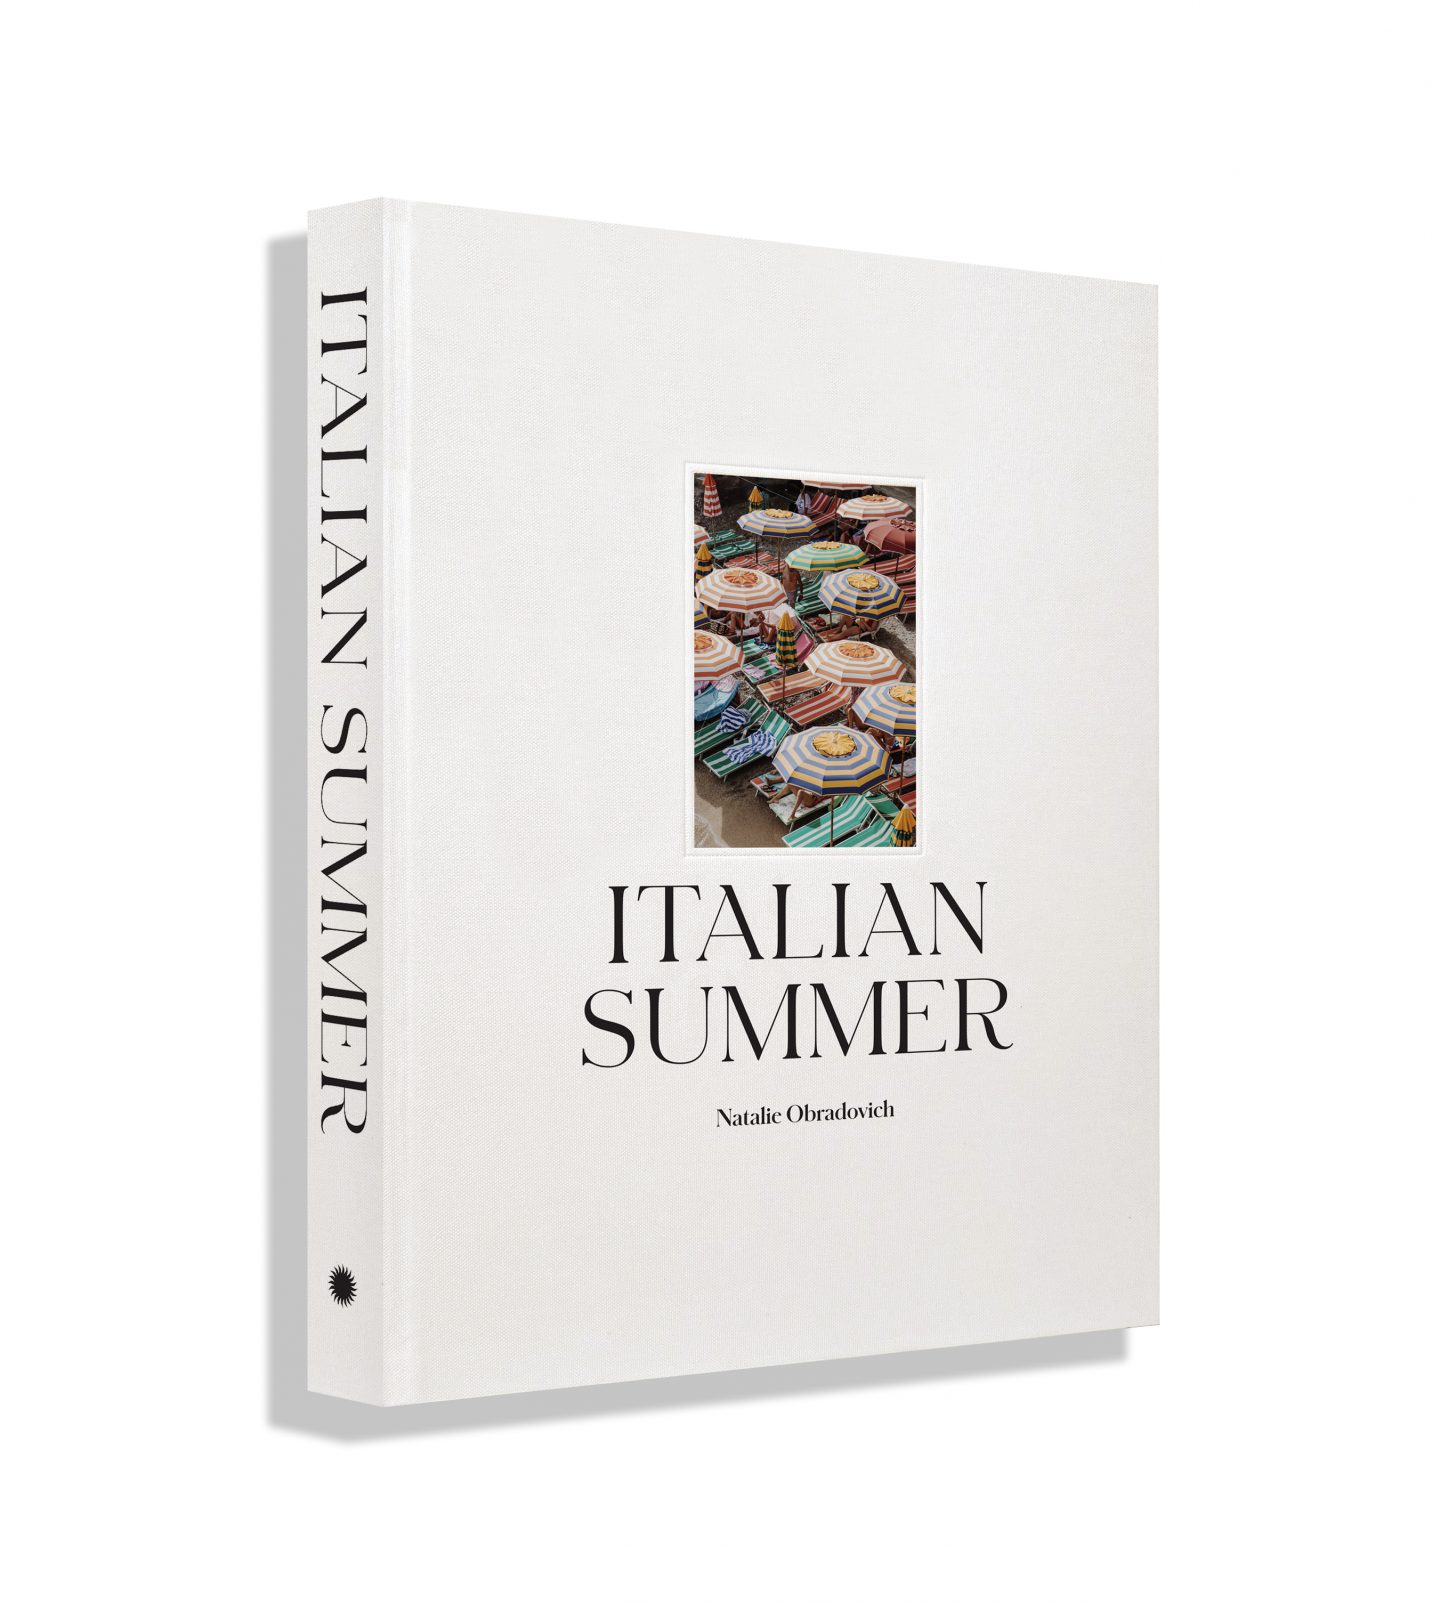 ITALIAN SUMMER by Natalie Obradovich // Must Have Coffee Table Book Launching in May